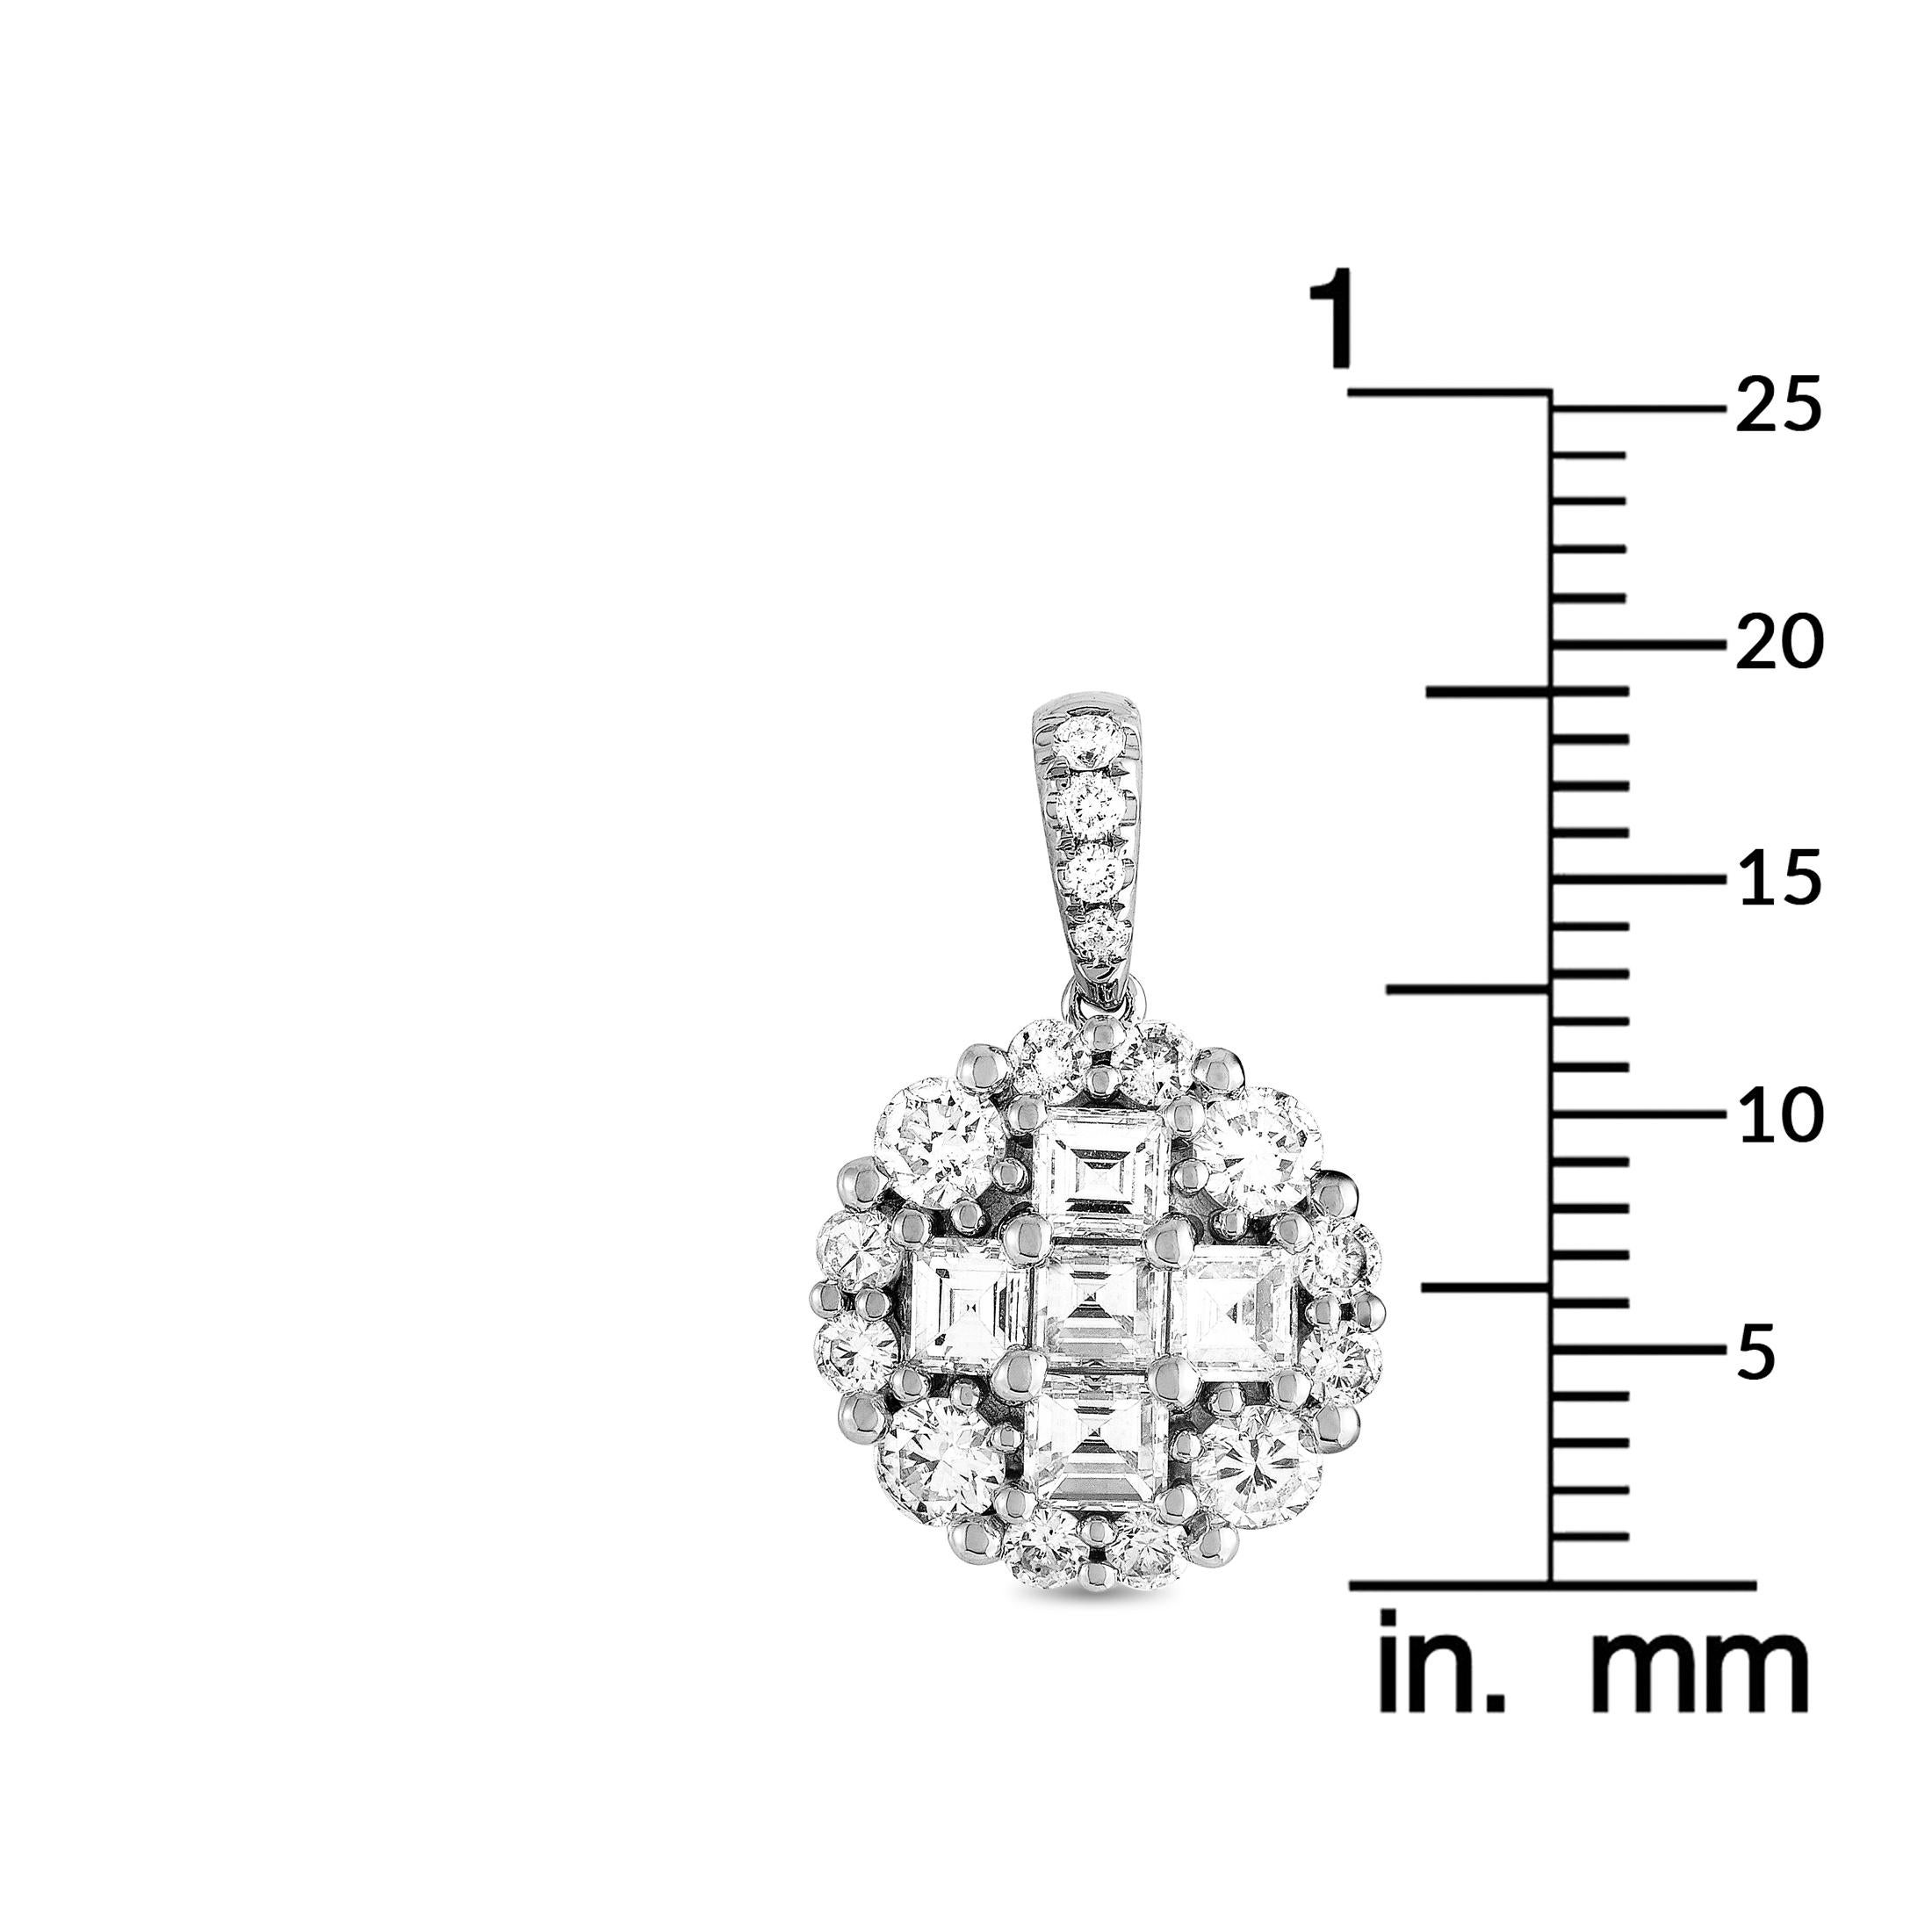 This LB Exclusive pendant is crafted from 18K white gold and set with round and asscher diamonds that total 0.52 and 0.65 carats respectively. The pendant weighs 2.6 grams and measures 0.75” in length and 0.45” in width.

Offered in brand new